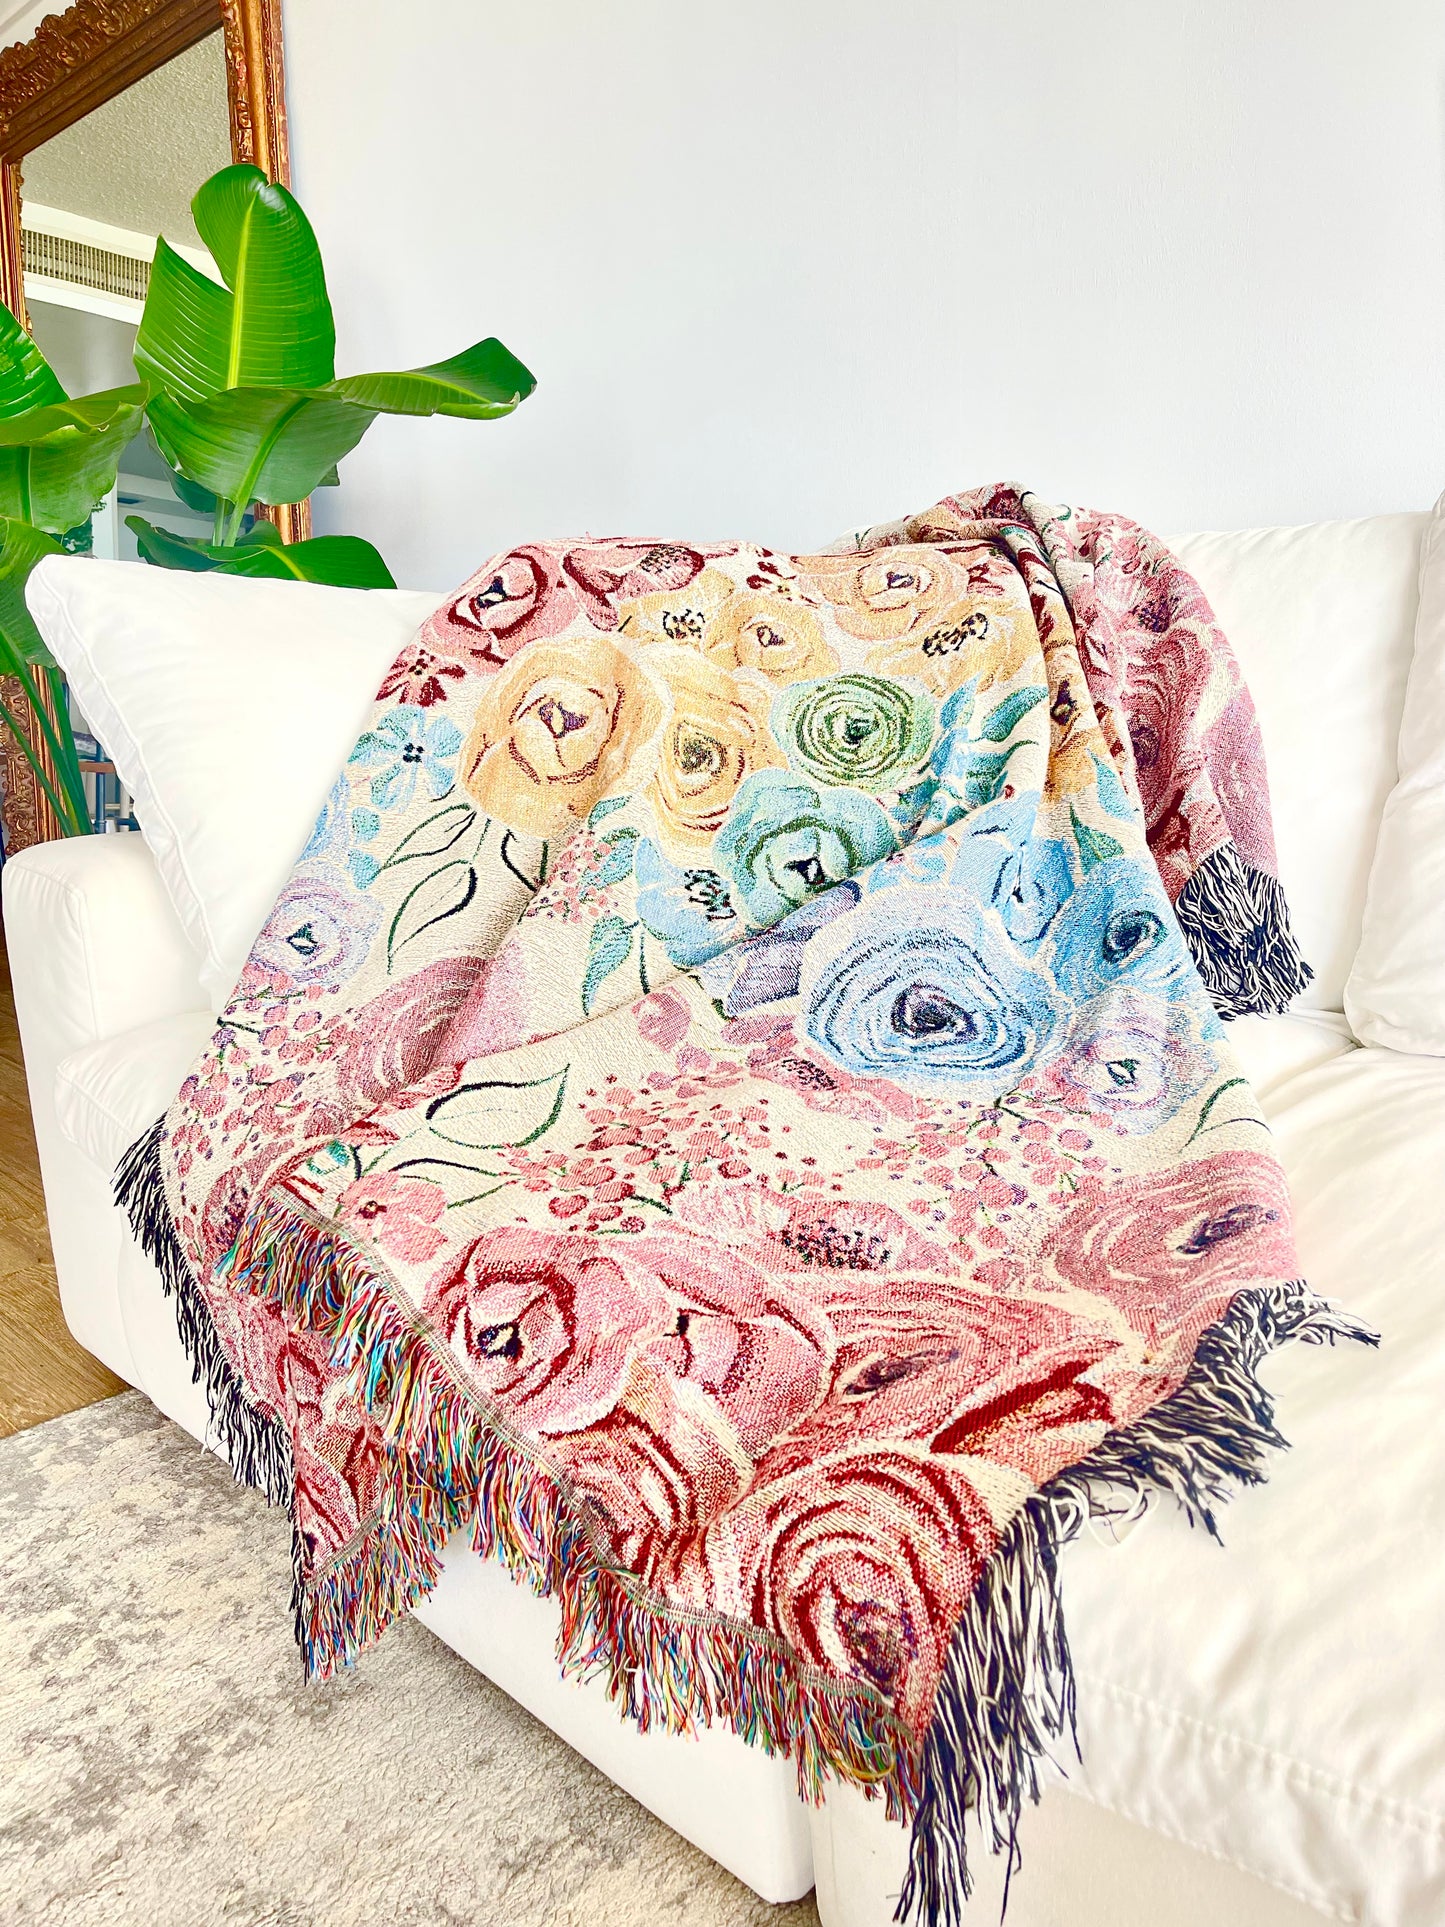 "Bloom Goes the Dynamite" Woven Blanket